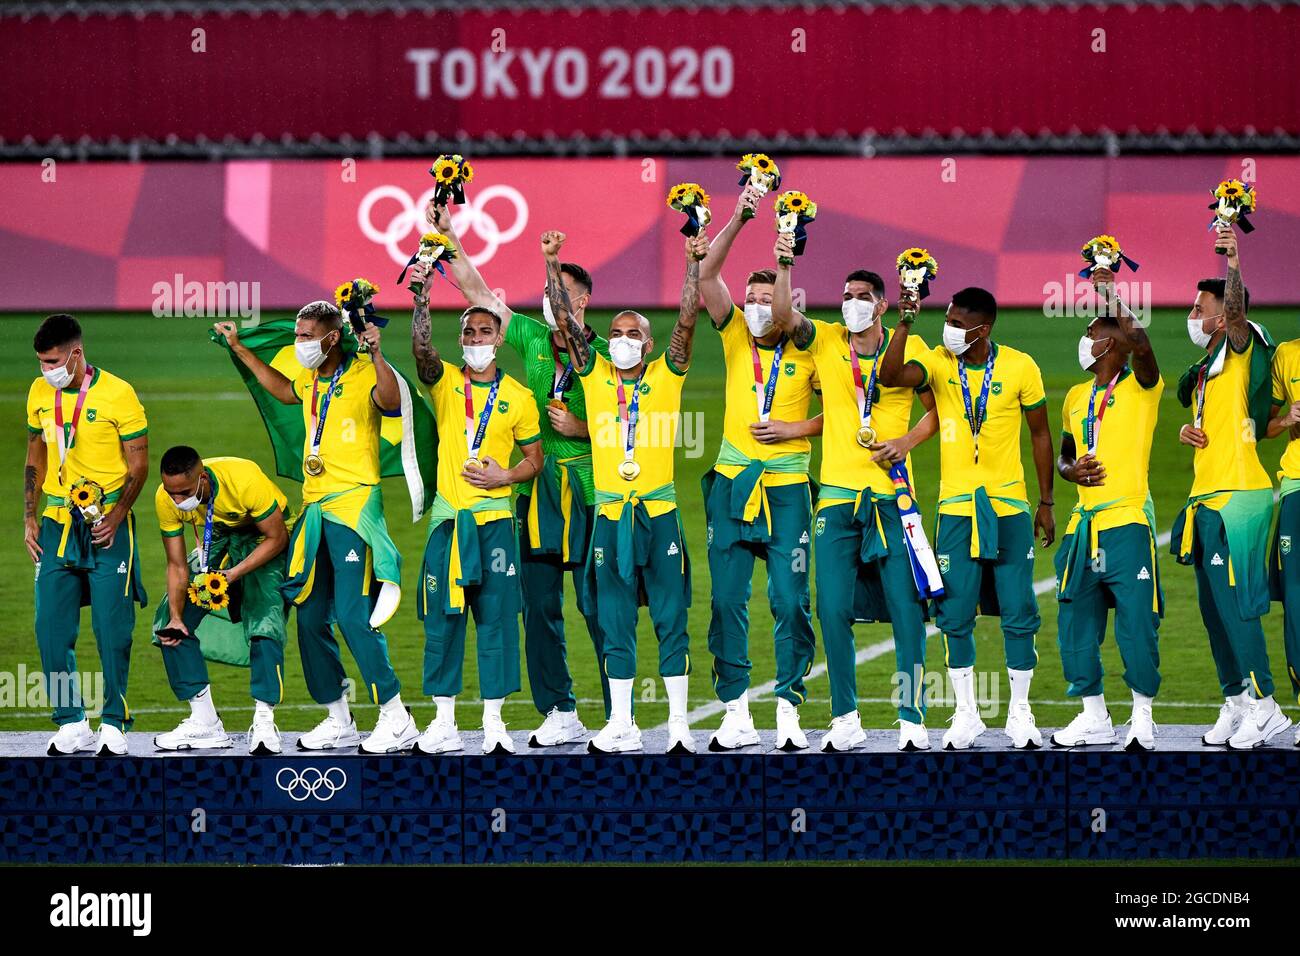 YOKOHAMA, JAPAN - AUGUST 7: Paulinho of Brazil, Bruno Guimaraes of Brazil, Matheus Cunha of Brazil, Richarlison of Brazil, Antony of Brazil, Brenno Costa of Brazil, Dani Alves of Brazil, Bruno Fuchs of Brazil, Nino of Brazil, Abner Vinicius of Brazil and Malcom of Brazil showing their gold medal after the Tokyo 2020 Olympic Mens Football Tournament Gold Medal Match between Brazil and Spain at International Stadium Yokohama on August 7, 2021 in Yokohama, Japan (Photo by Pablo Morano/Orange Pictures) Stock Photo